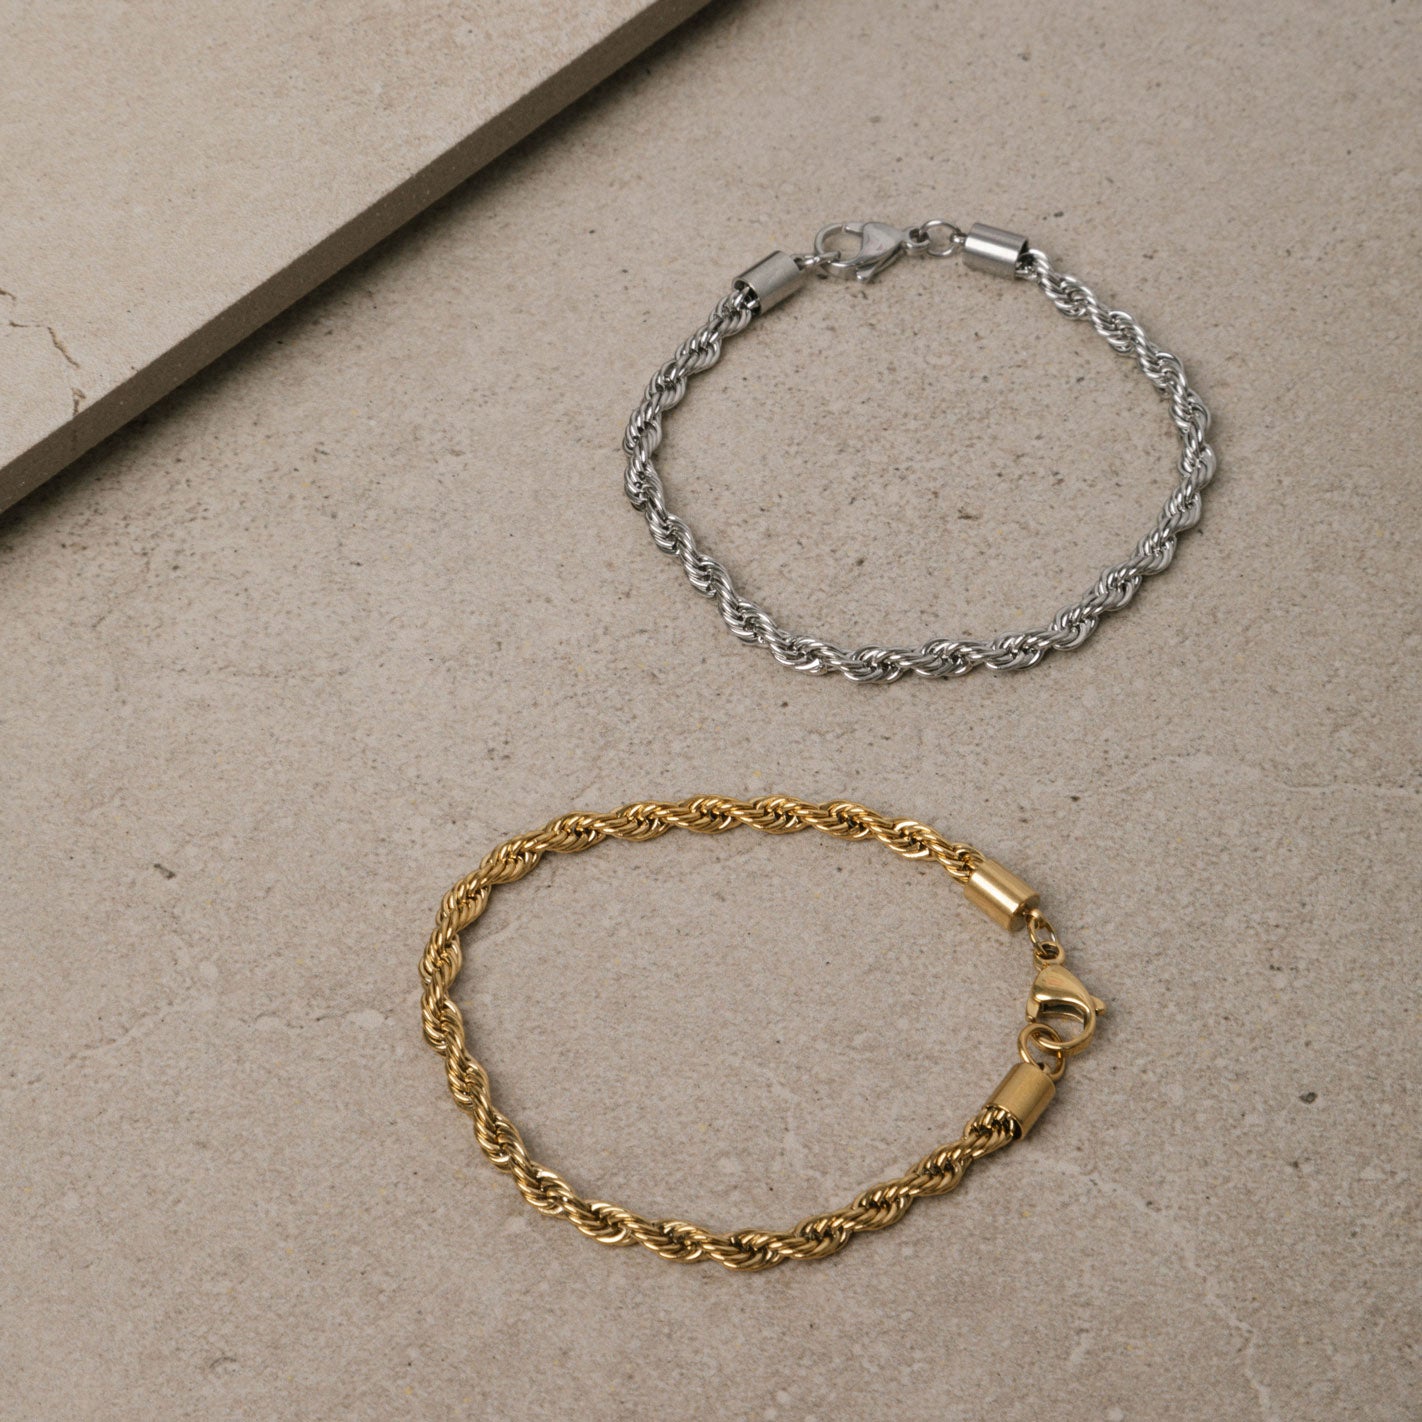 Image of the Twist Rope Chain Bracelet in Gold is crafted with high-quality 18K Gold plating, and features a length of 18cm and width of 4mm. Enjoy the additional benefits of its non-tarnish and water-resistant properties.